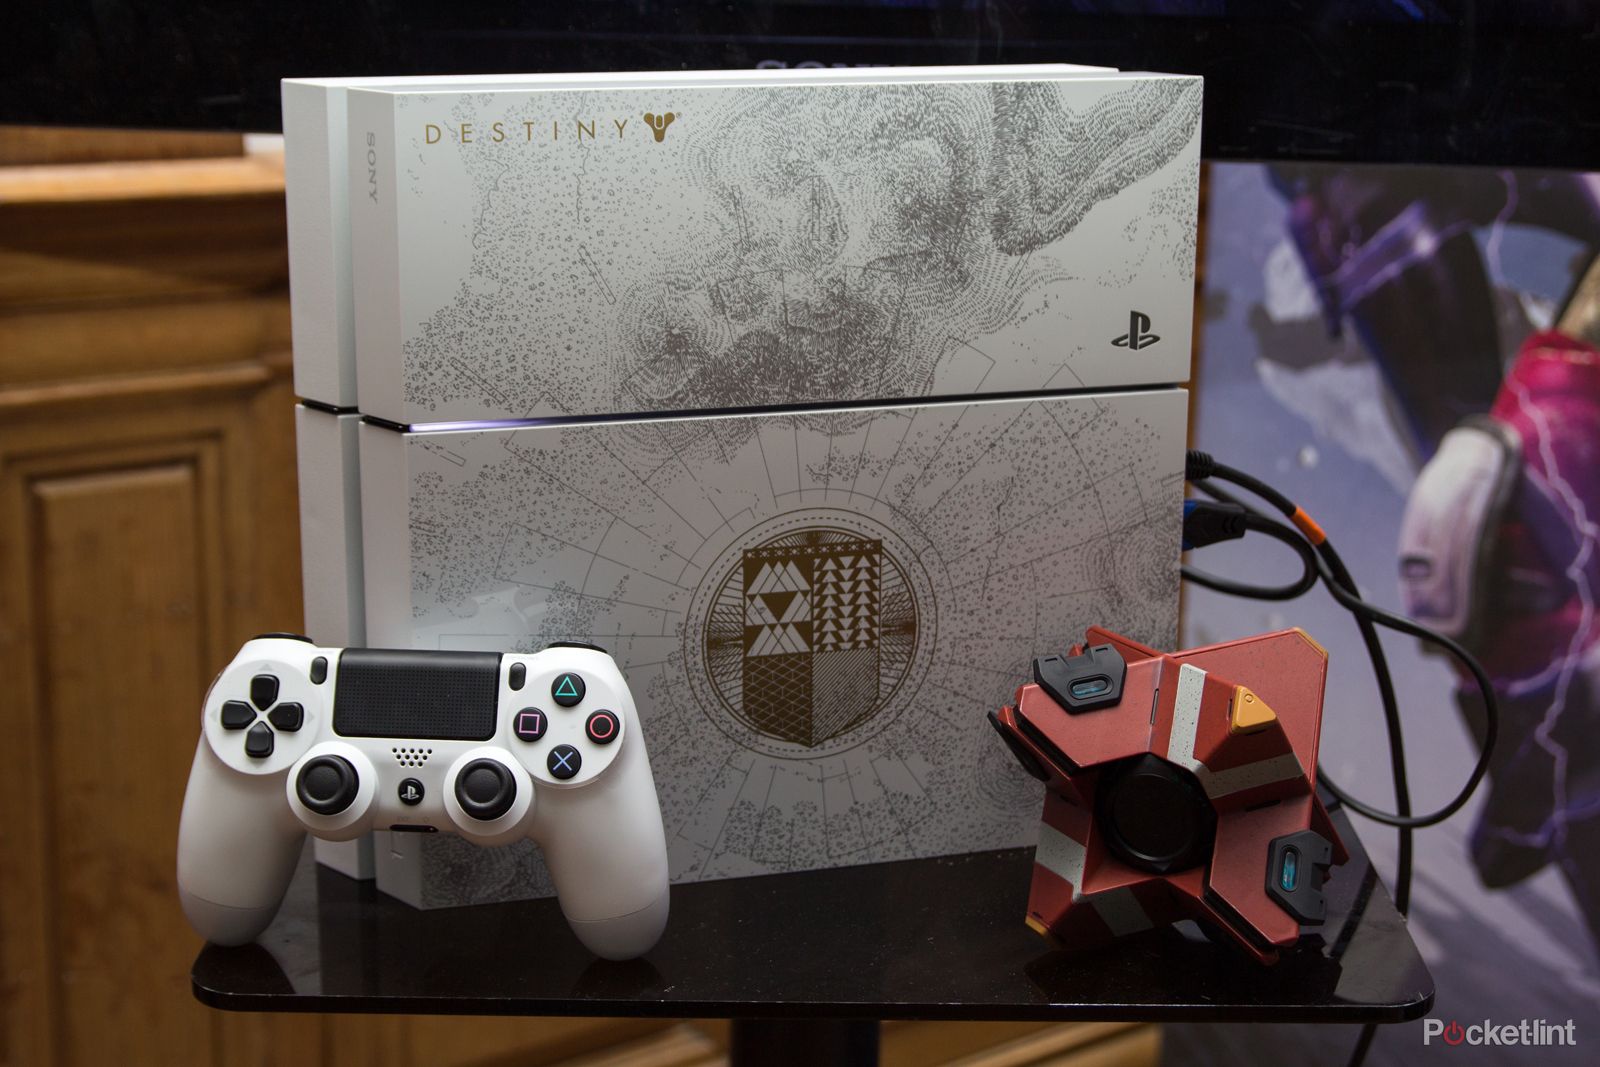 Guardians! This PS4 Destiny: The Taken console is calling you